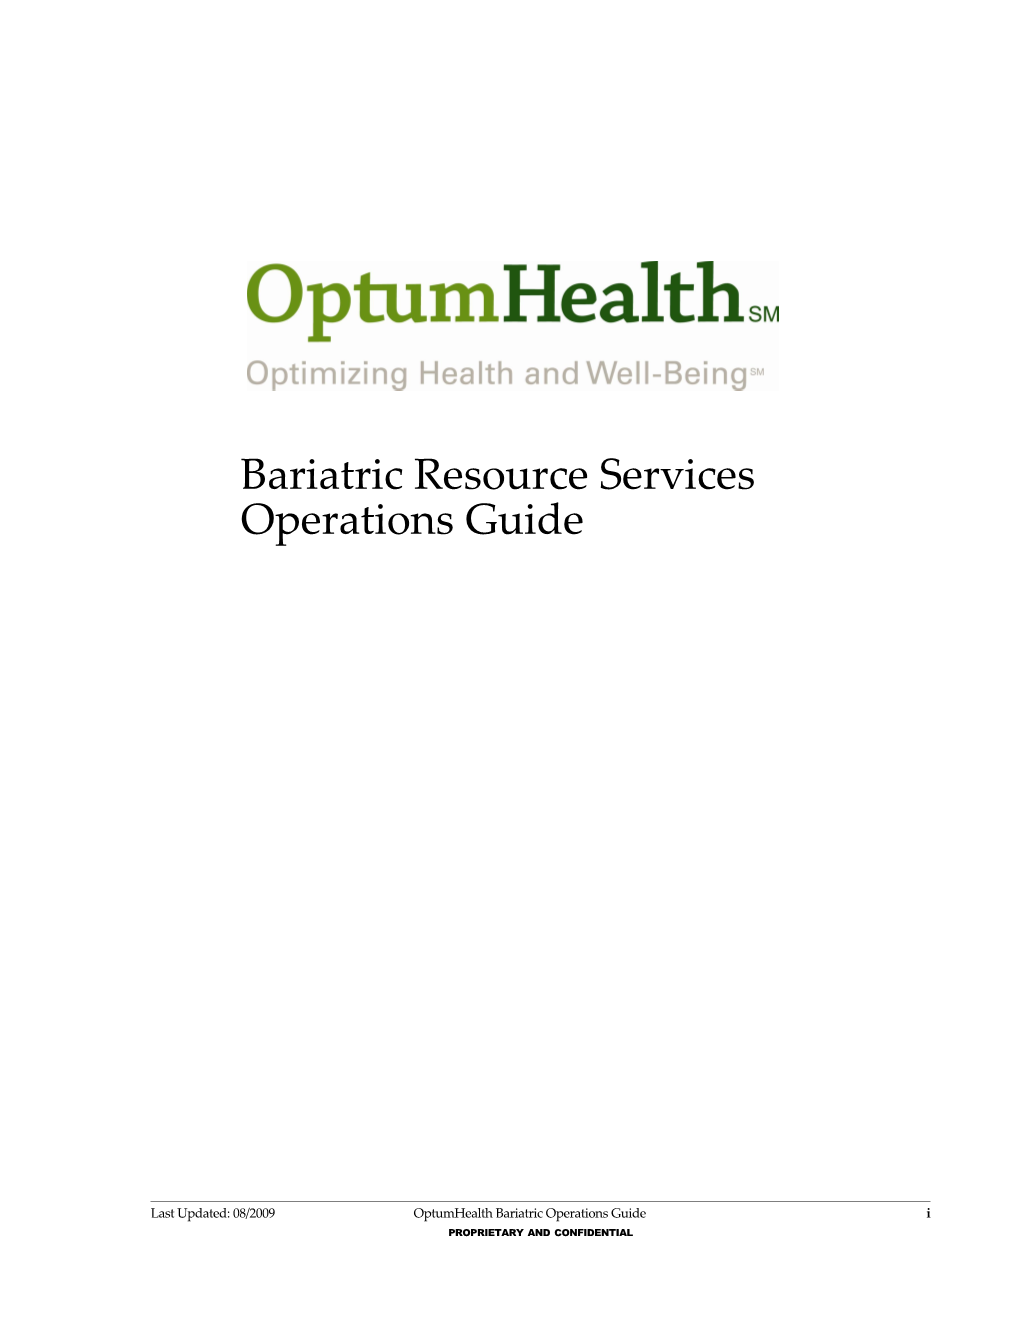 Bariatric Resource Services Operations Guide